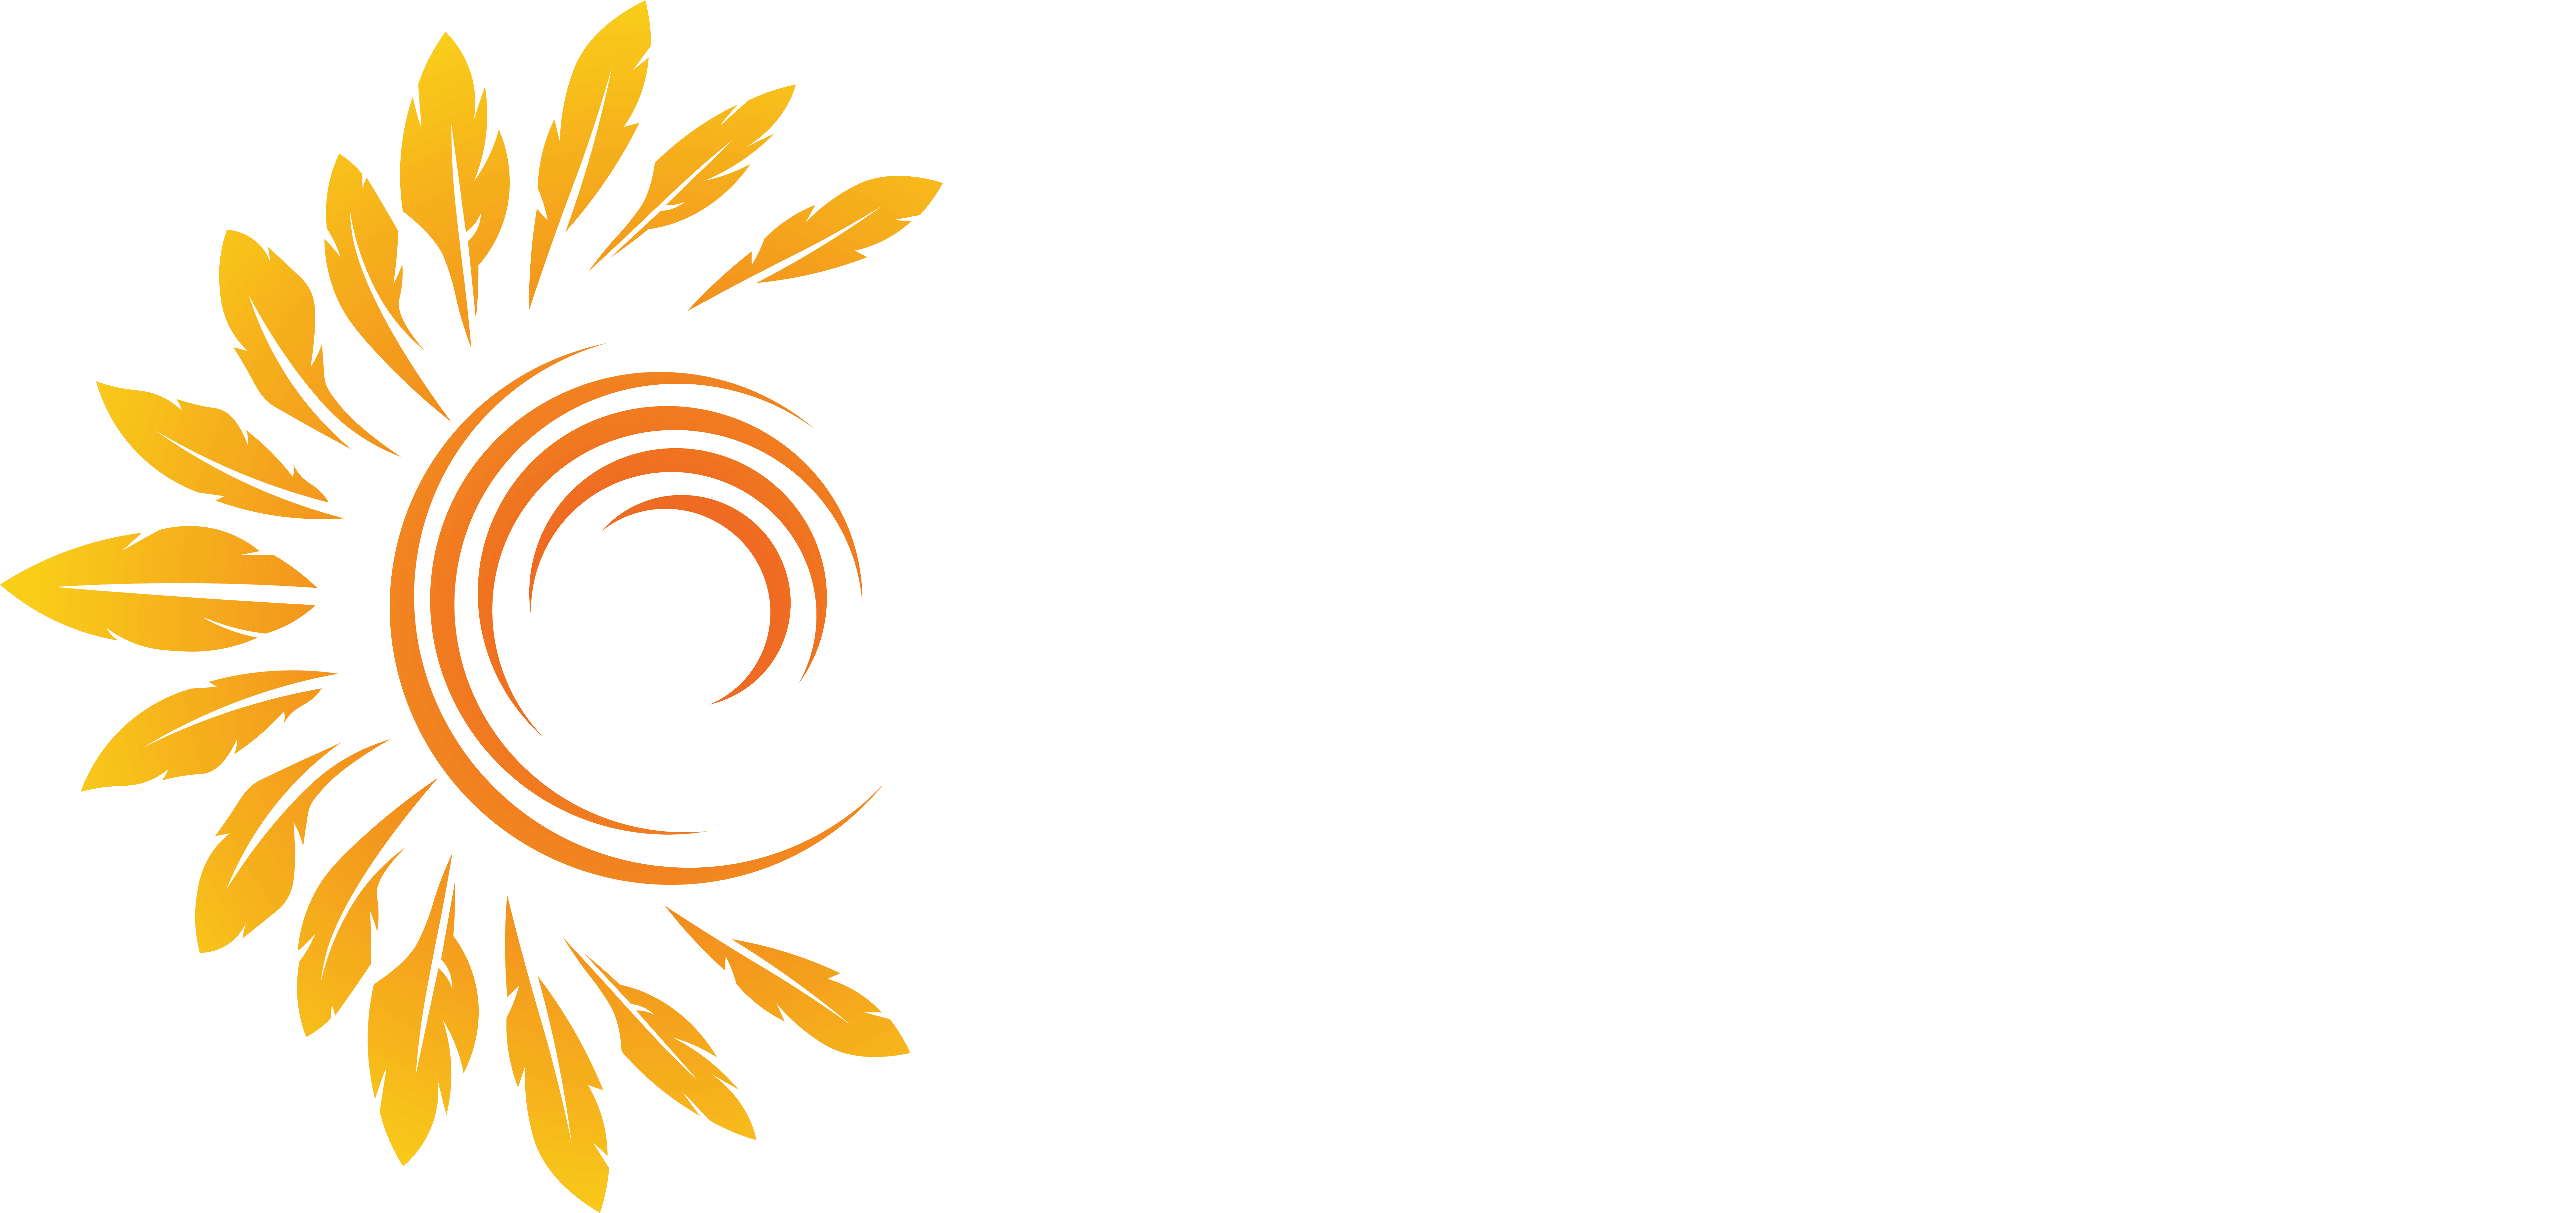 Native Energy Solutions 